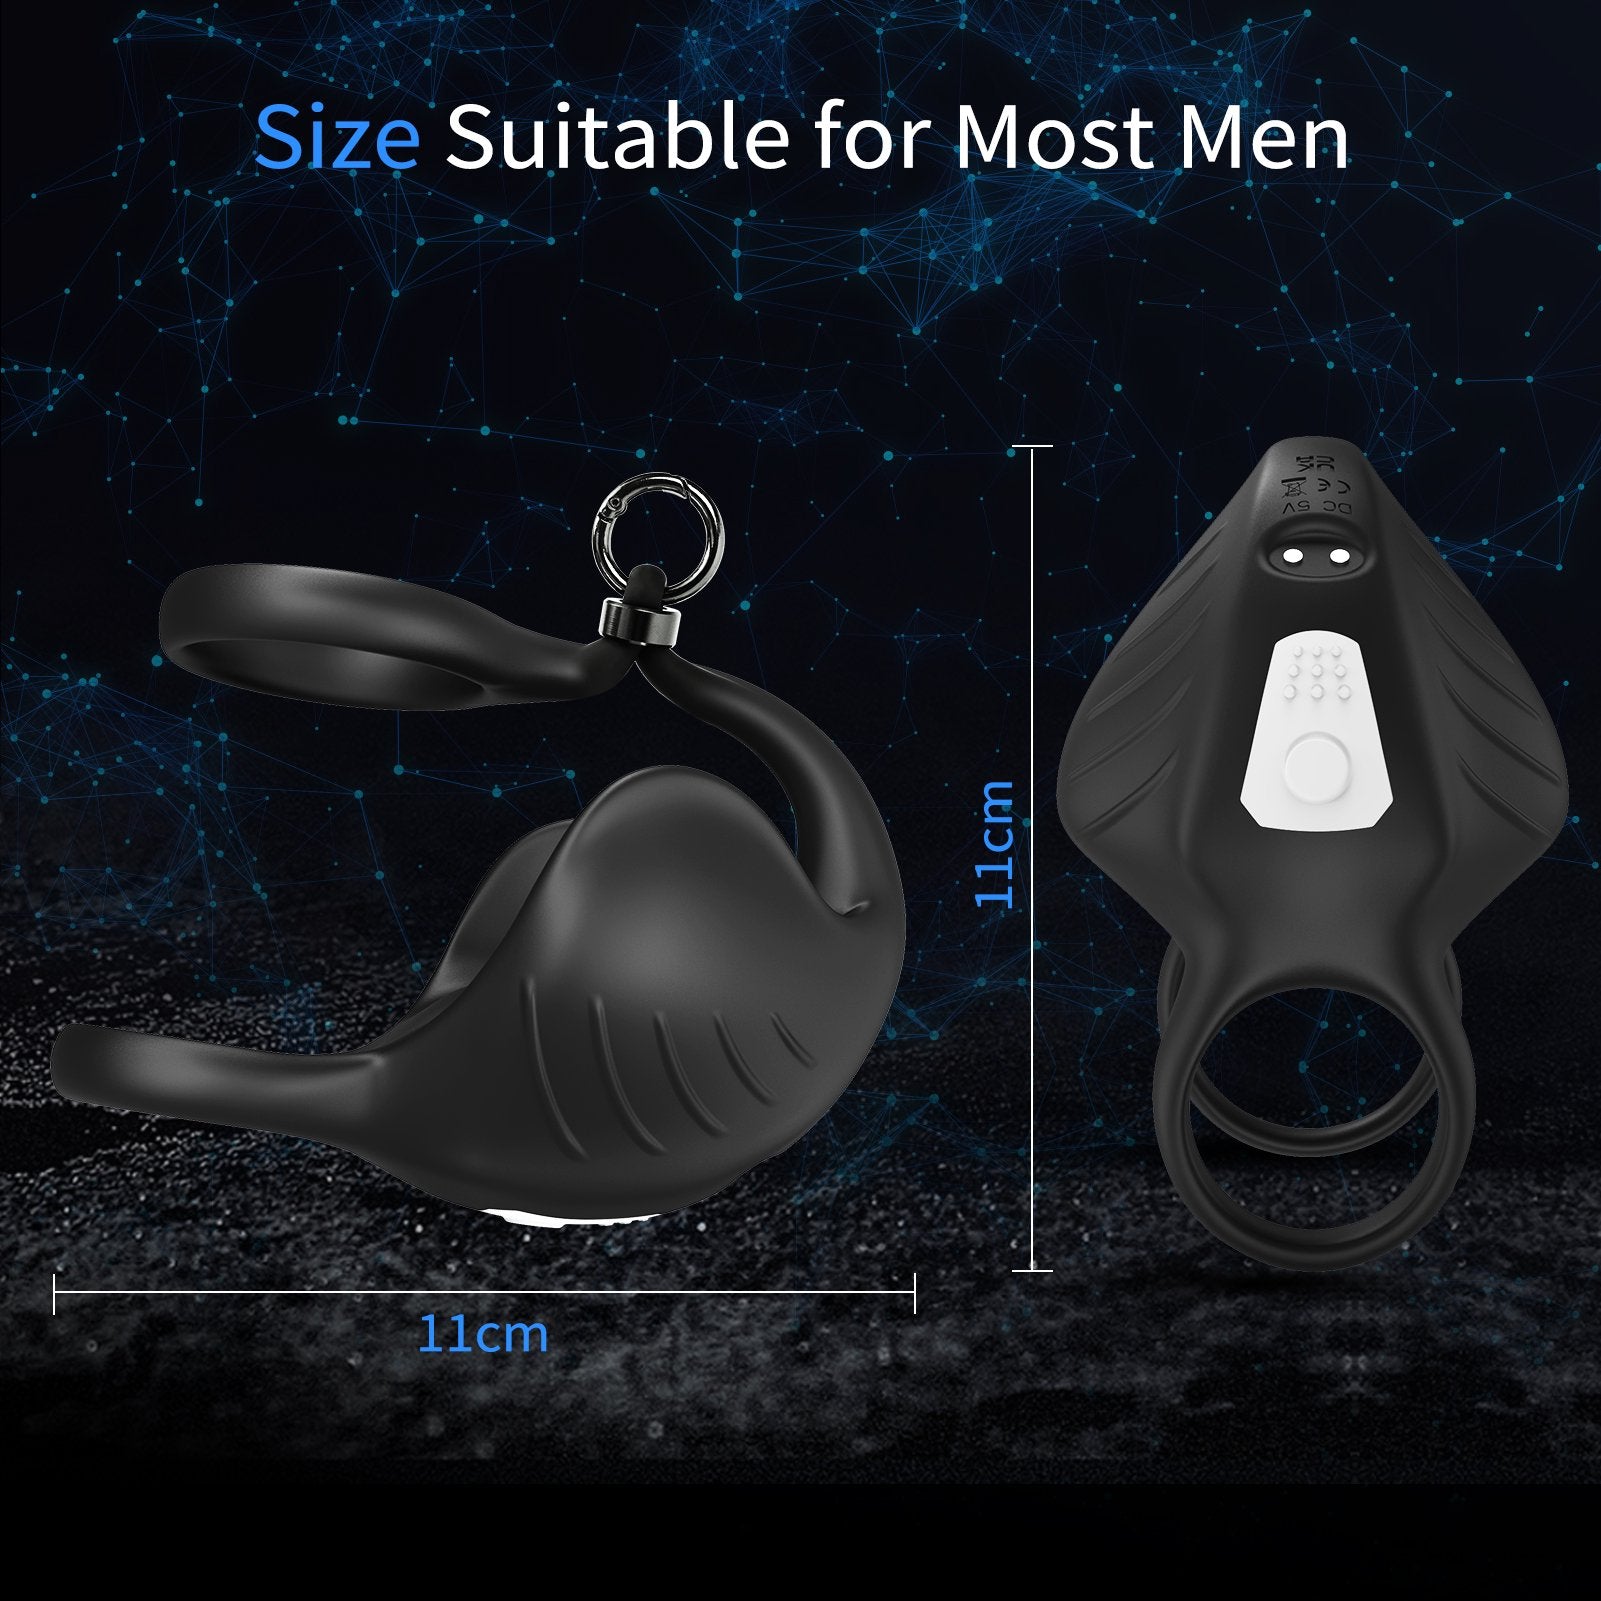 FIDECH 9 Vibrating Adjustable Double Penis Ring with Scrotum Cover